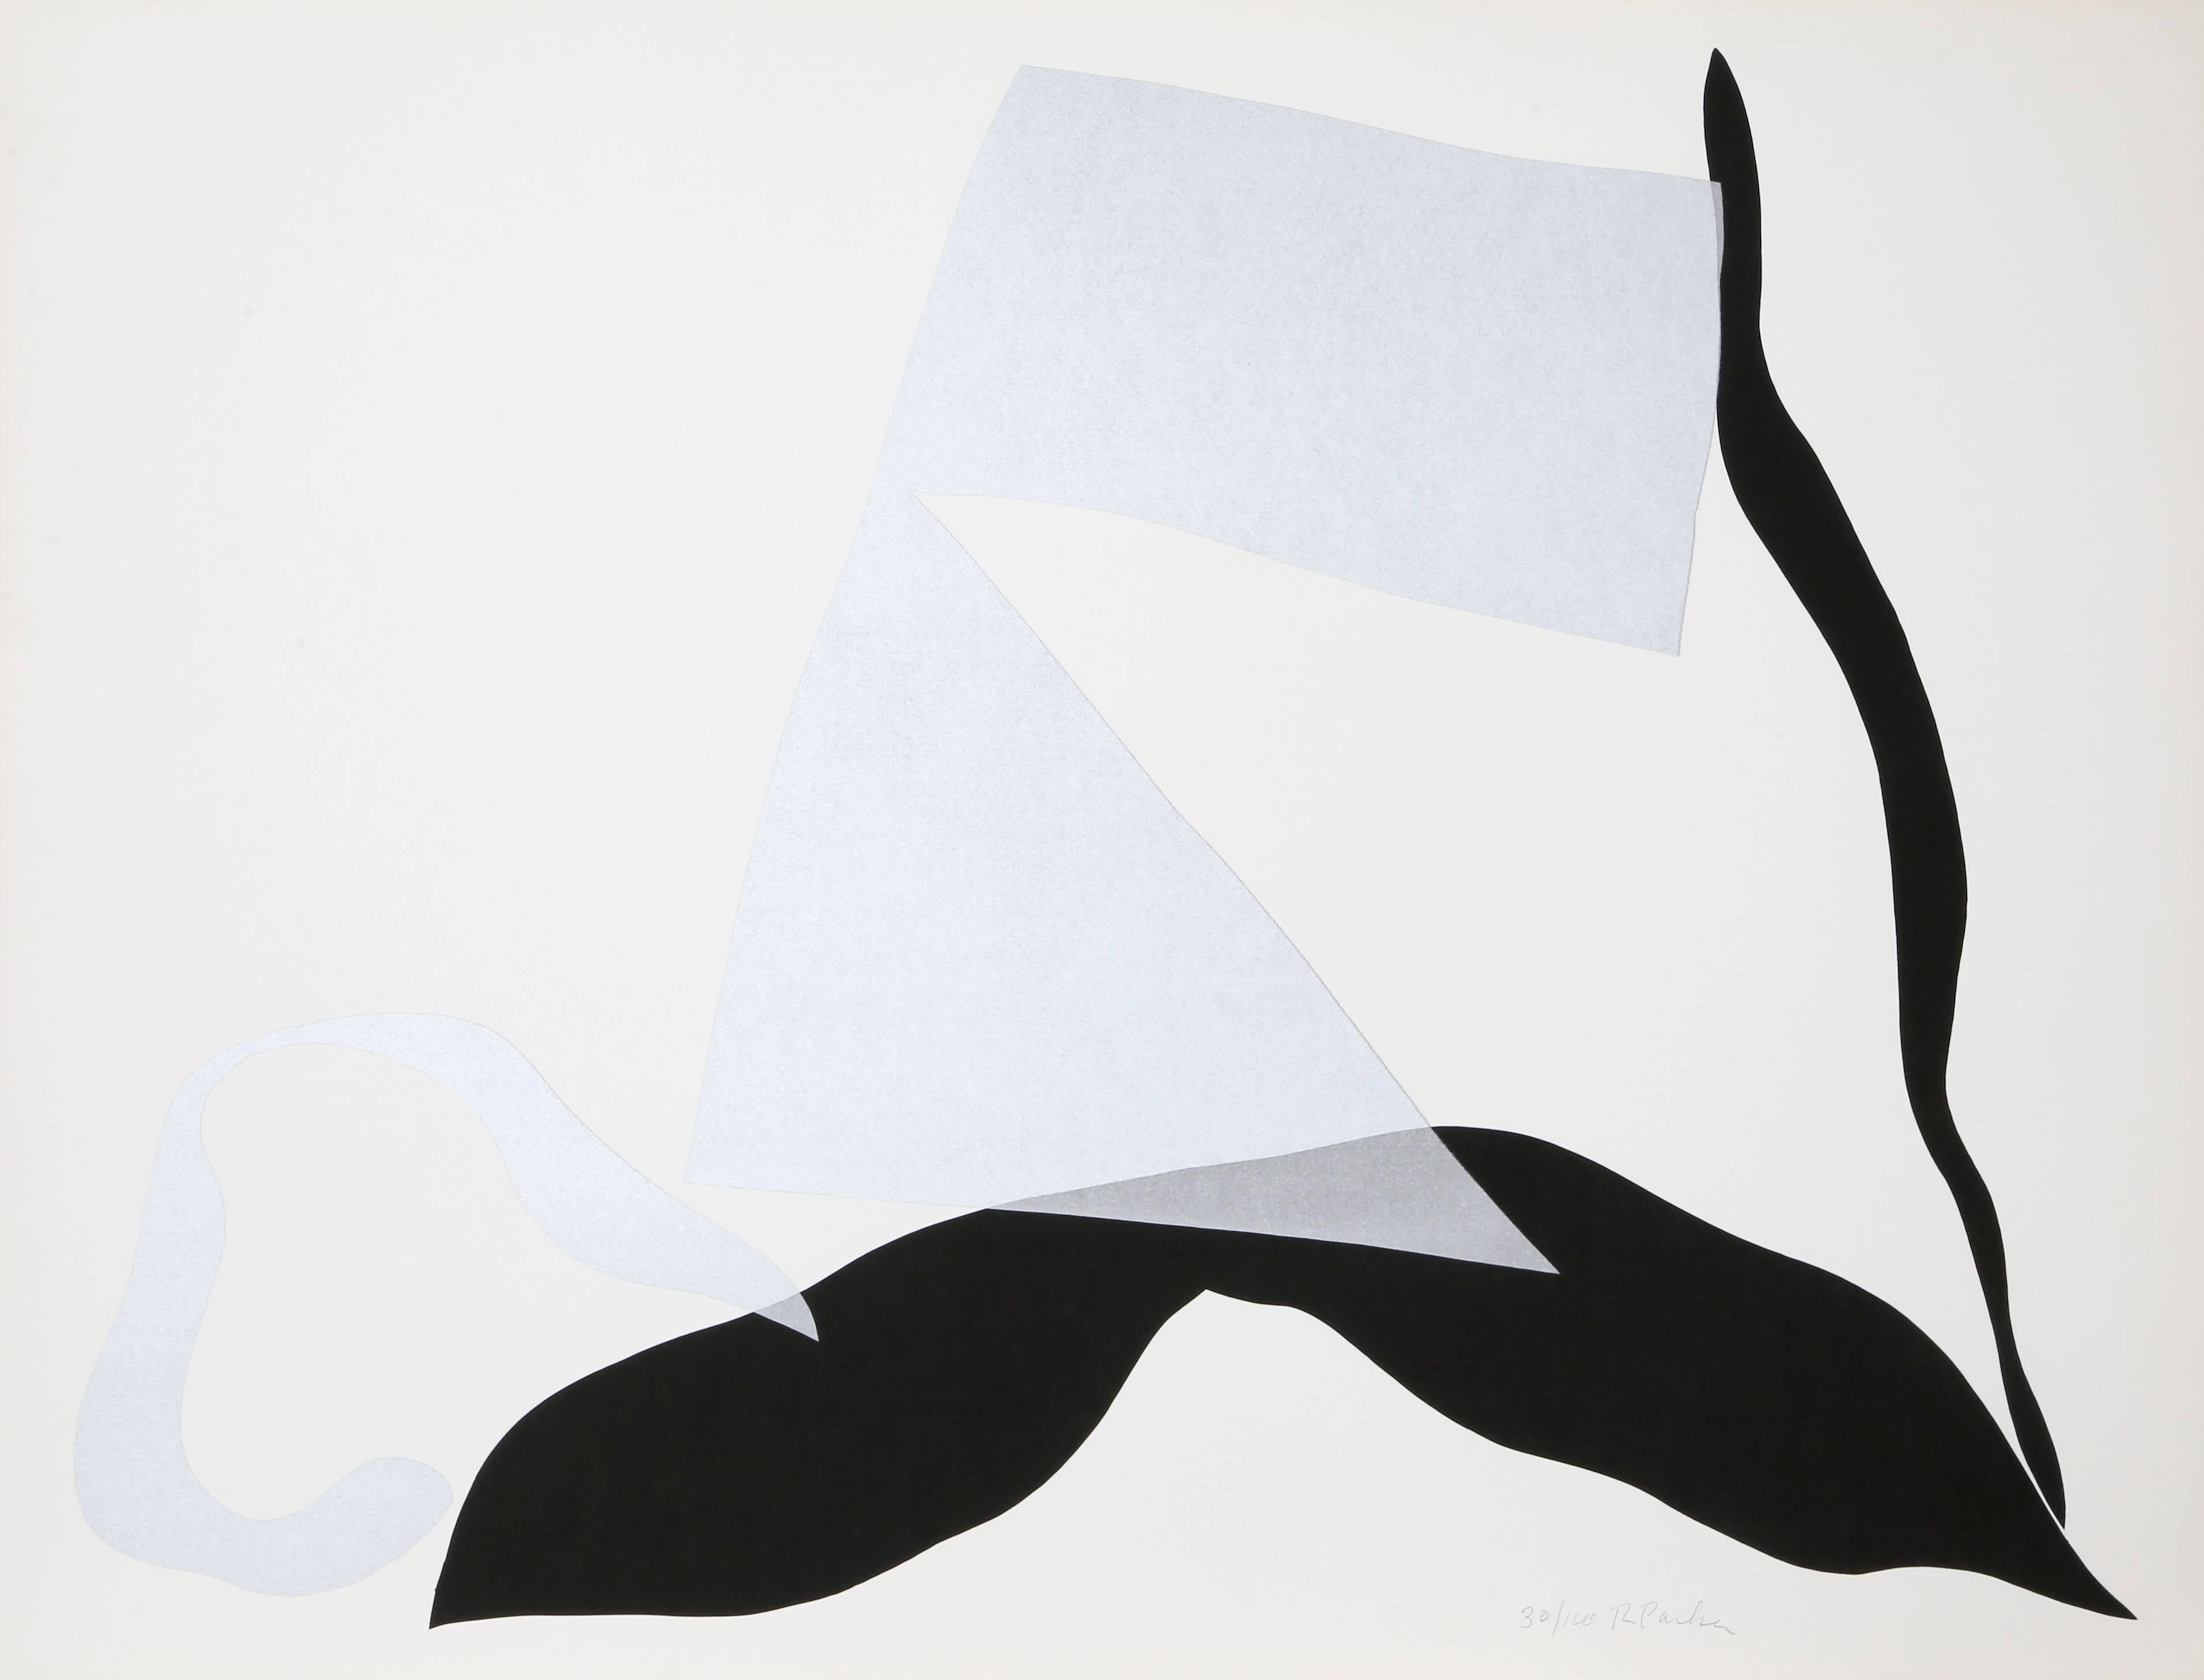 Artist: Raymond Parker, American (1922 - 1990)
Title: Untitled 
Year: 1980
Medium: Silkscreen, signed and numbered in pencil
Edition: 100
Size: 35 x 45 inches